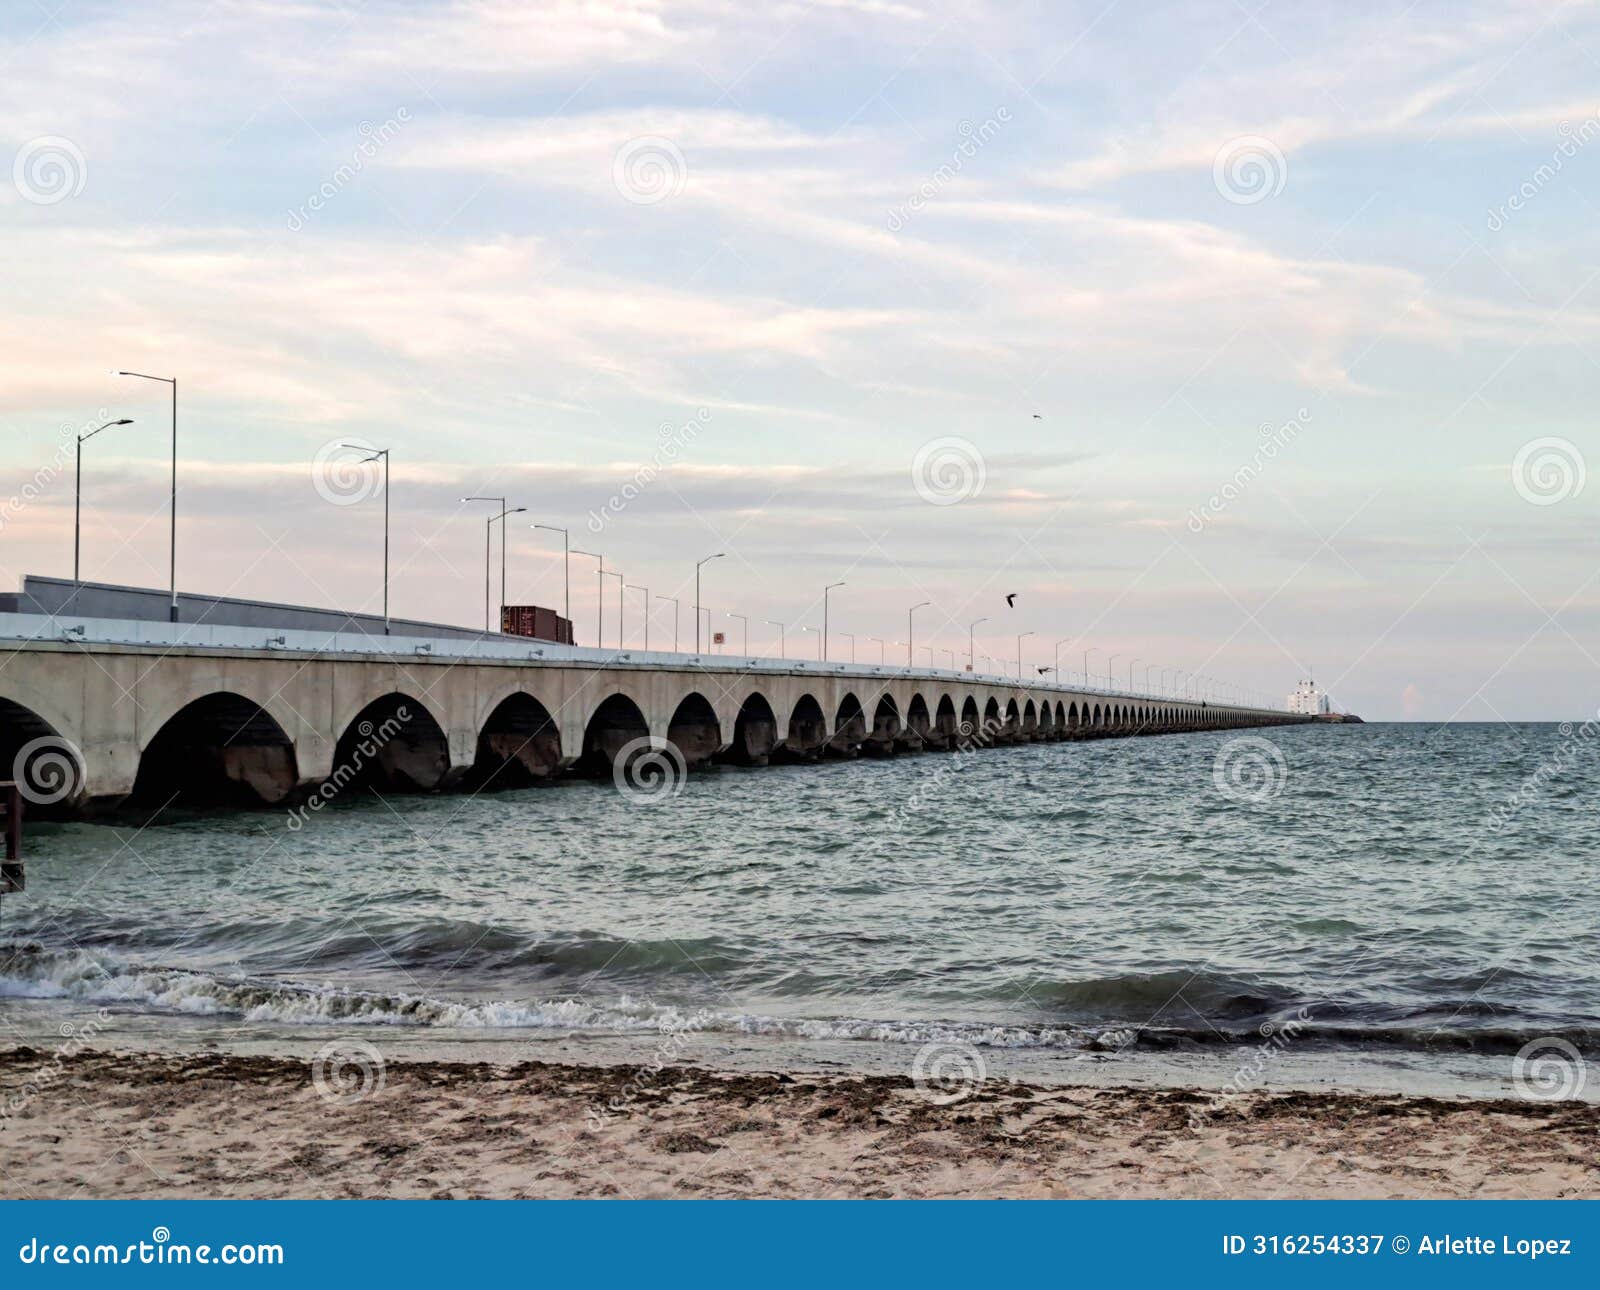 progreso is a mexican port city on the yucatan peninsula with its iconic arched pier and famous boardwalk